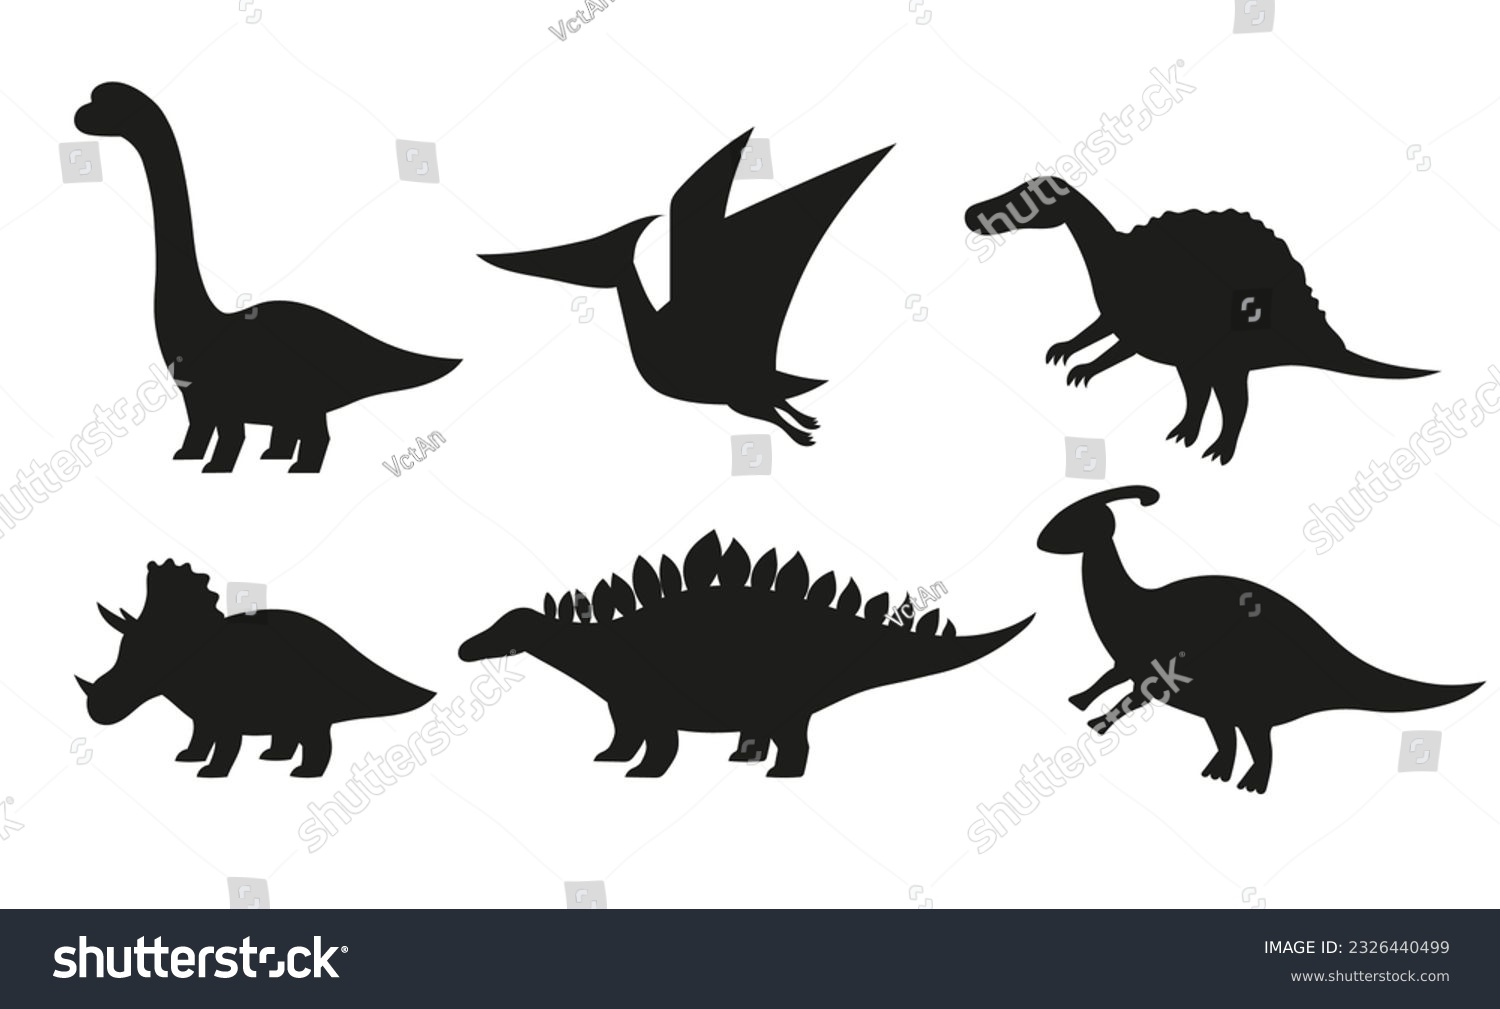 SVG of Dinosaurs black silhouettes set. Collection of stegosaurus, brontosaurus, triceratops, diplodocus, spinosaurus isolated on white background. svg